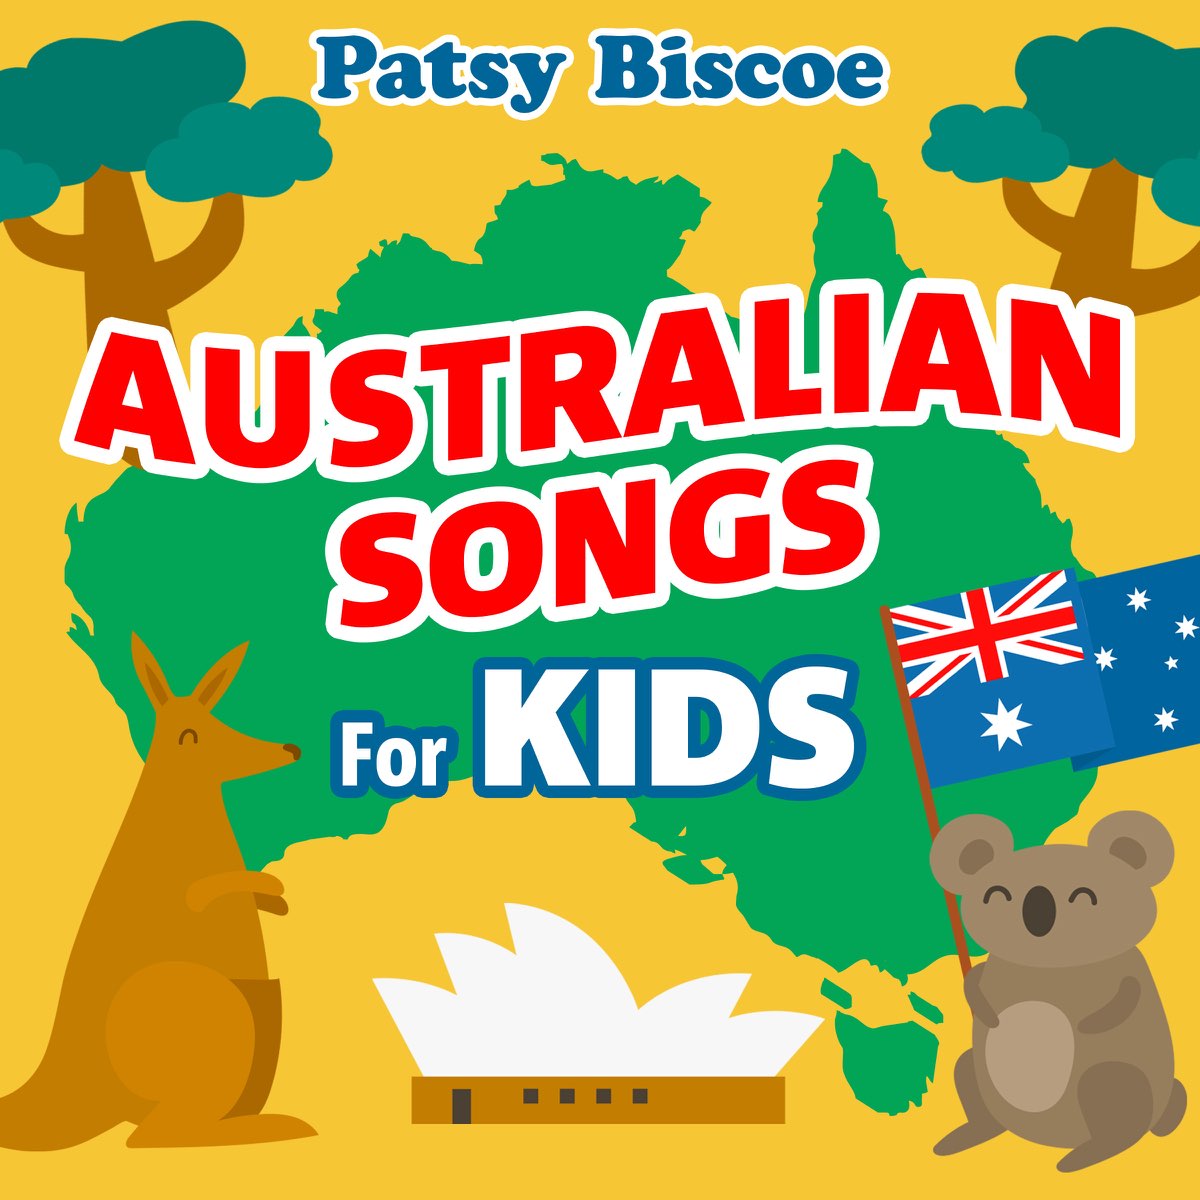 Australian Songs for Kids - Album by Patsy Biscoe - Apple Music